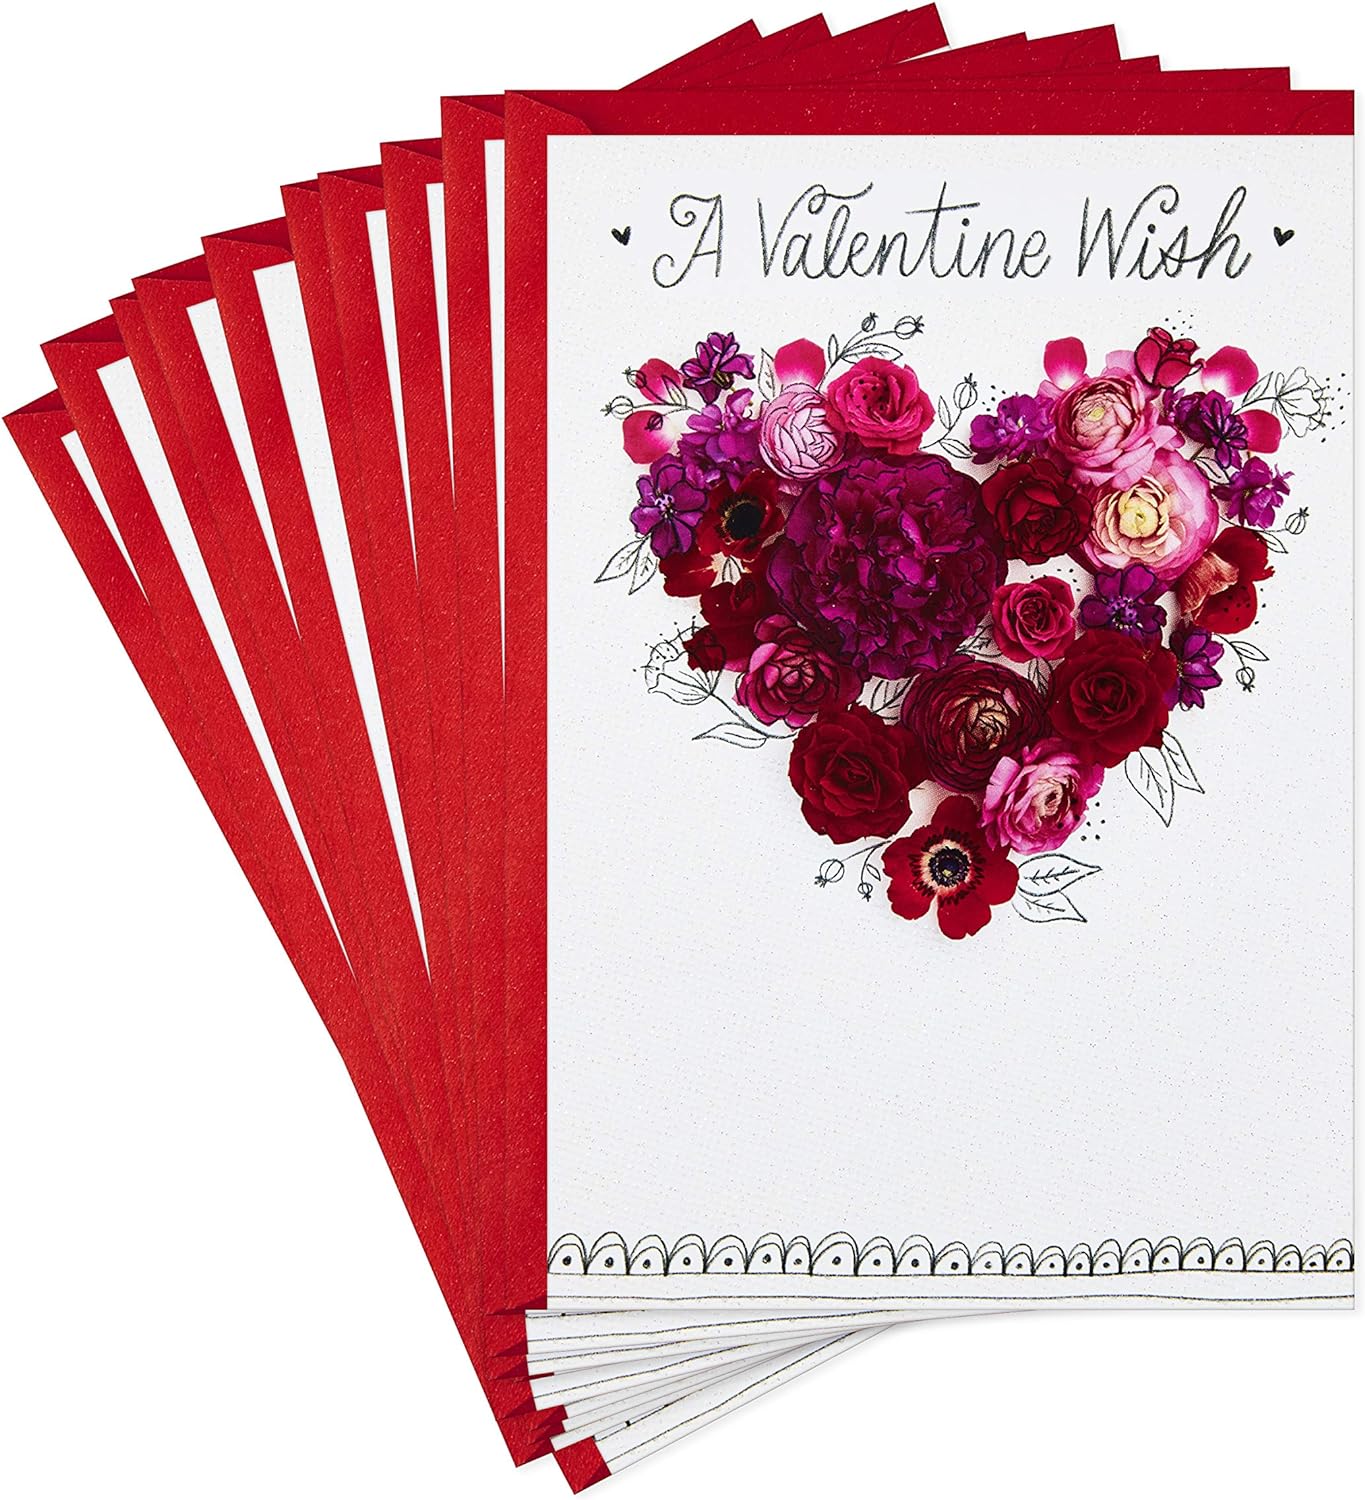 Valentines Day Cards Valentine Wish 10 Valentines Day Cards with Envelopes